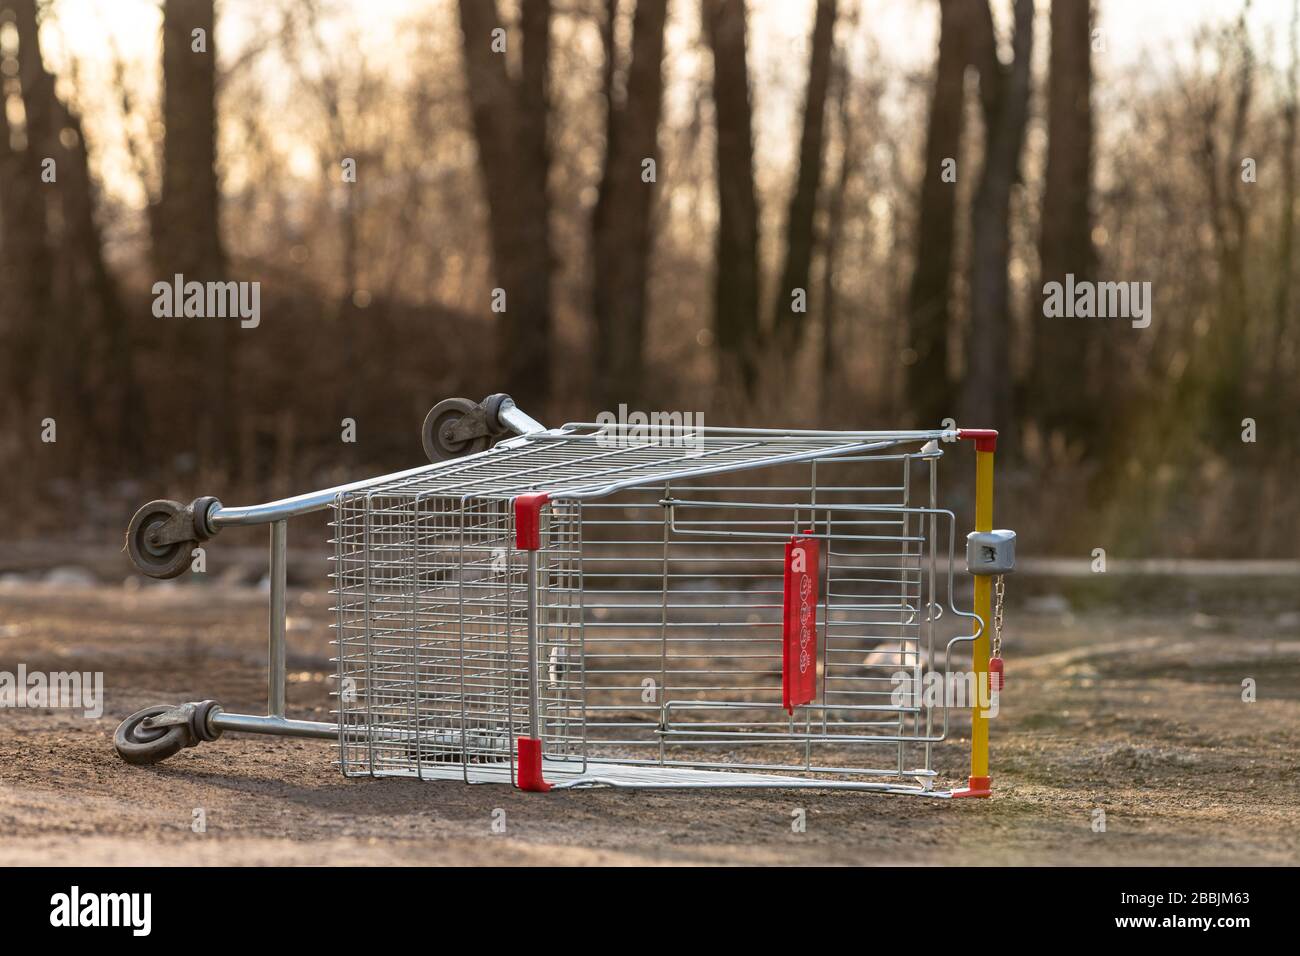 Inverted empty shopping cart on the street. Coronavirus pandemic effect - quarantine and isolation of the population in cities. Crisis, panic buying f Stock Photo